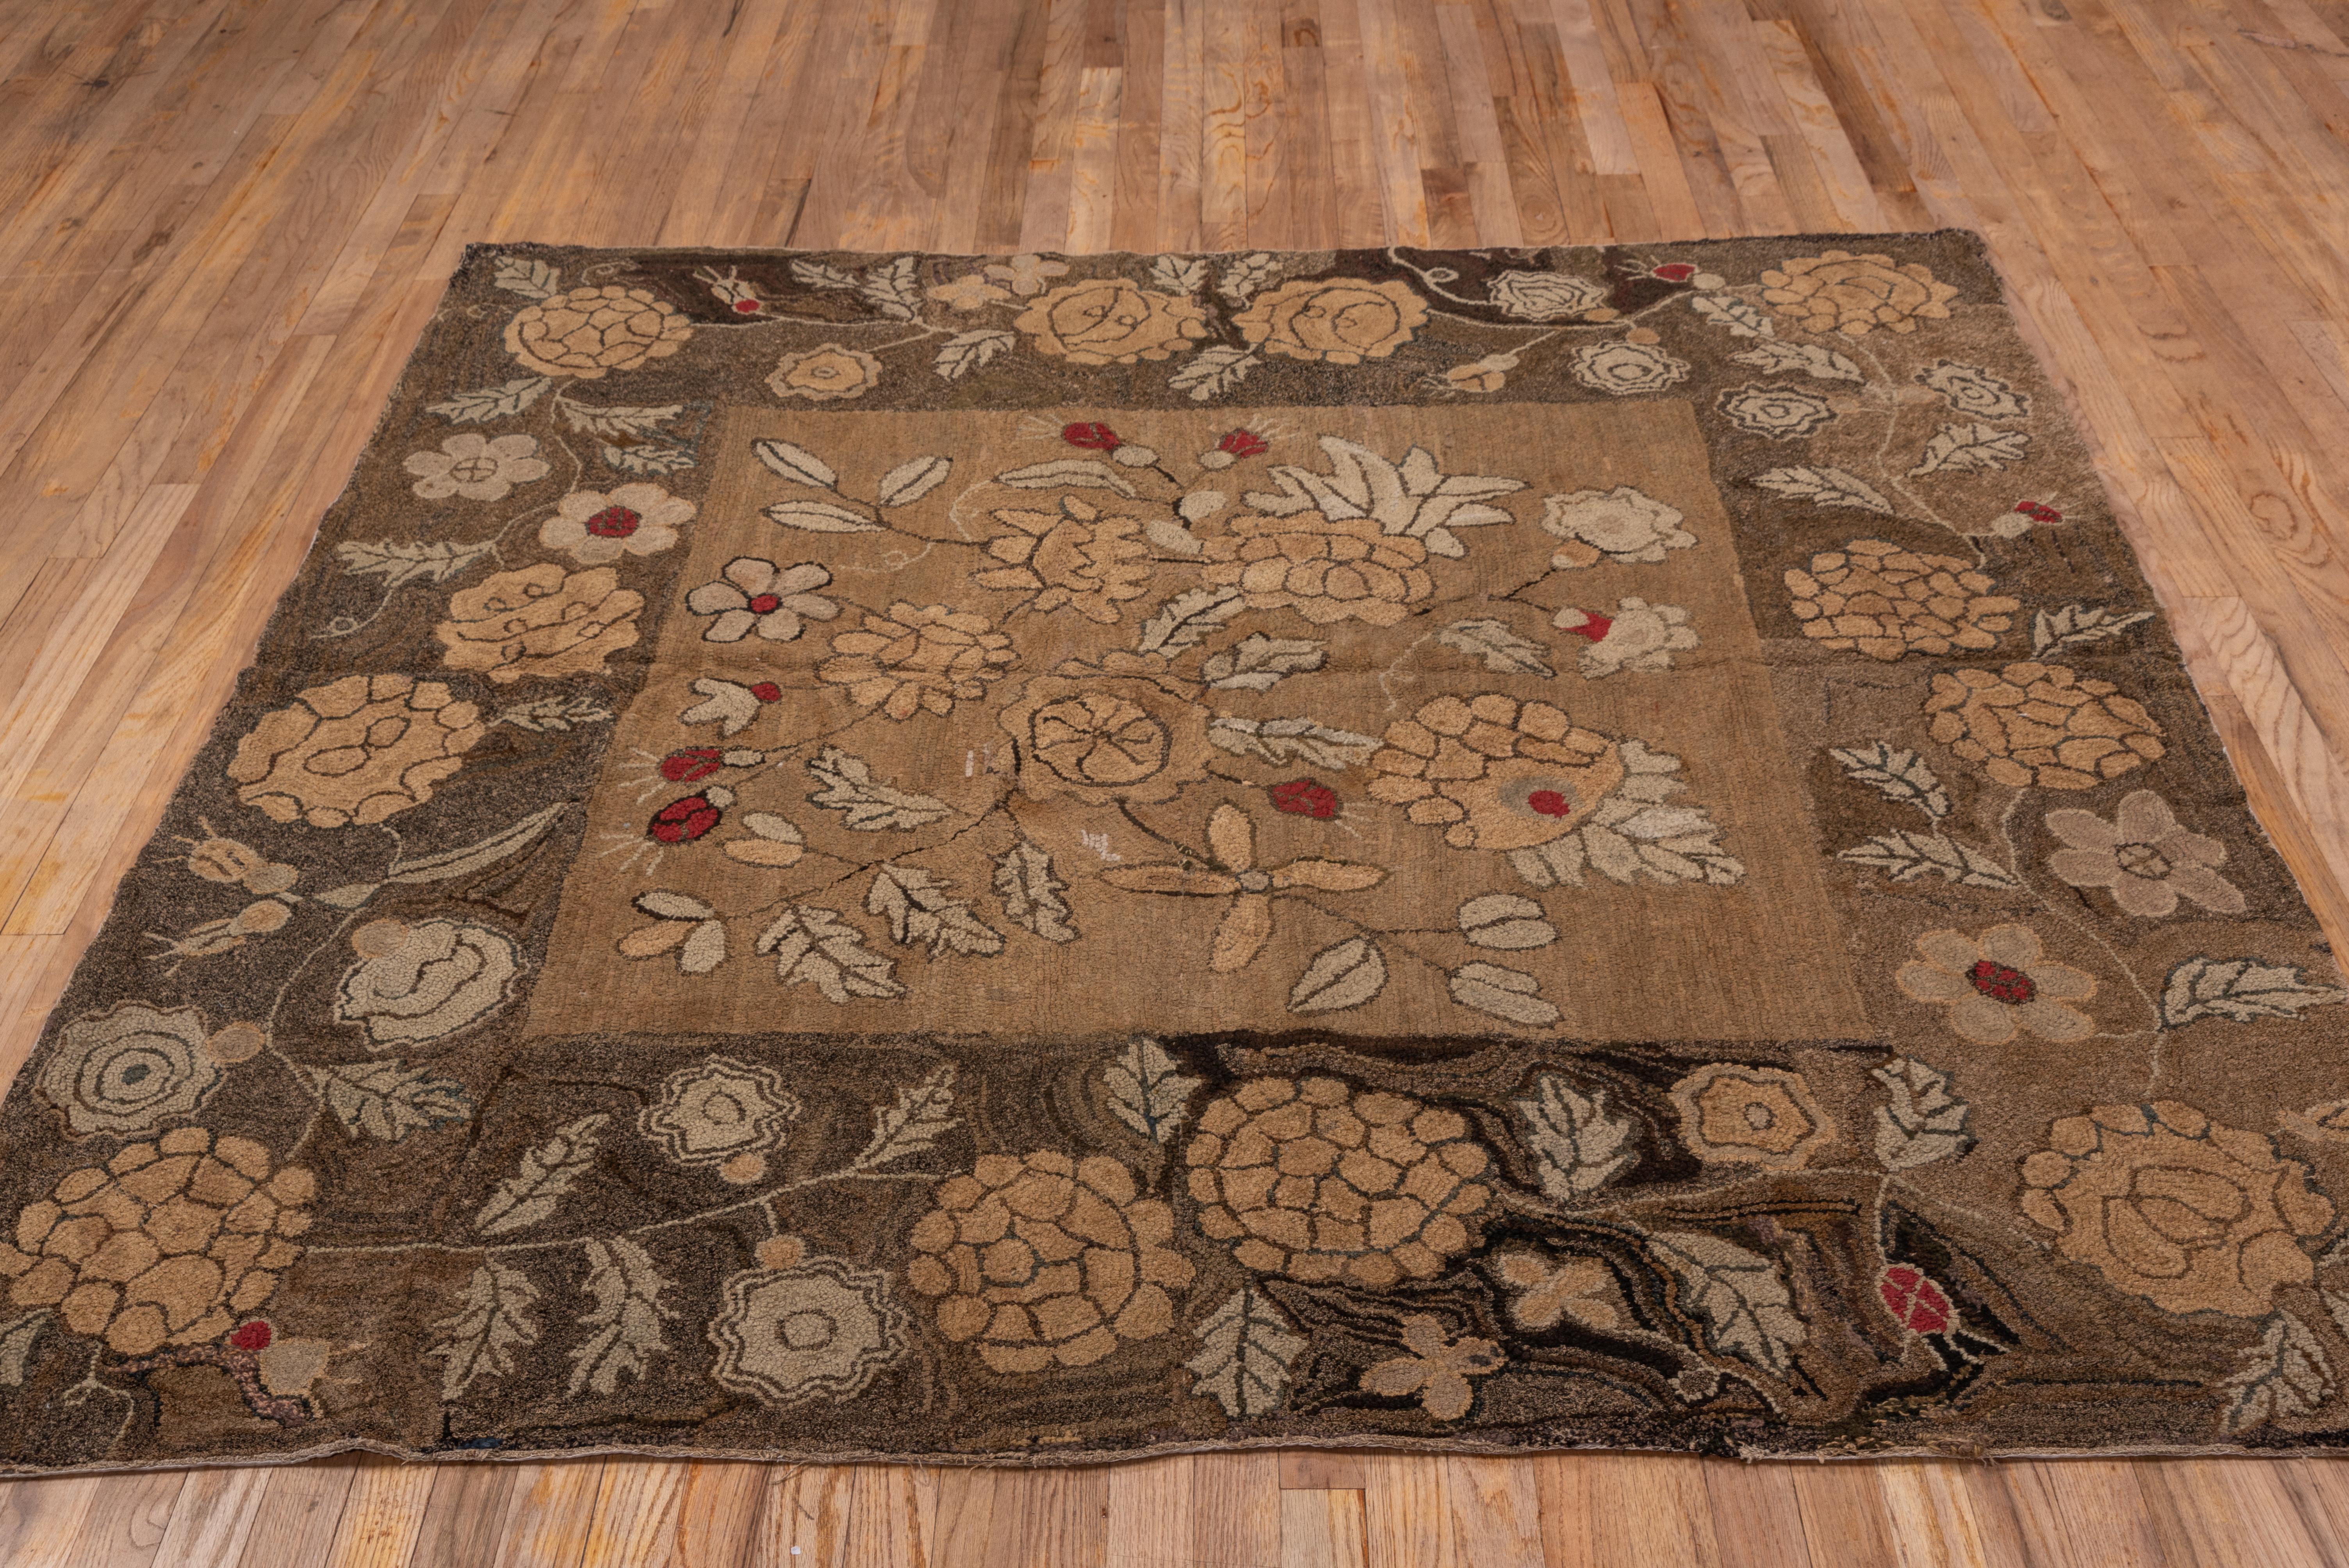 Hand-Crafted Rare Antique Square American Hooked Rug, circa 1880s